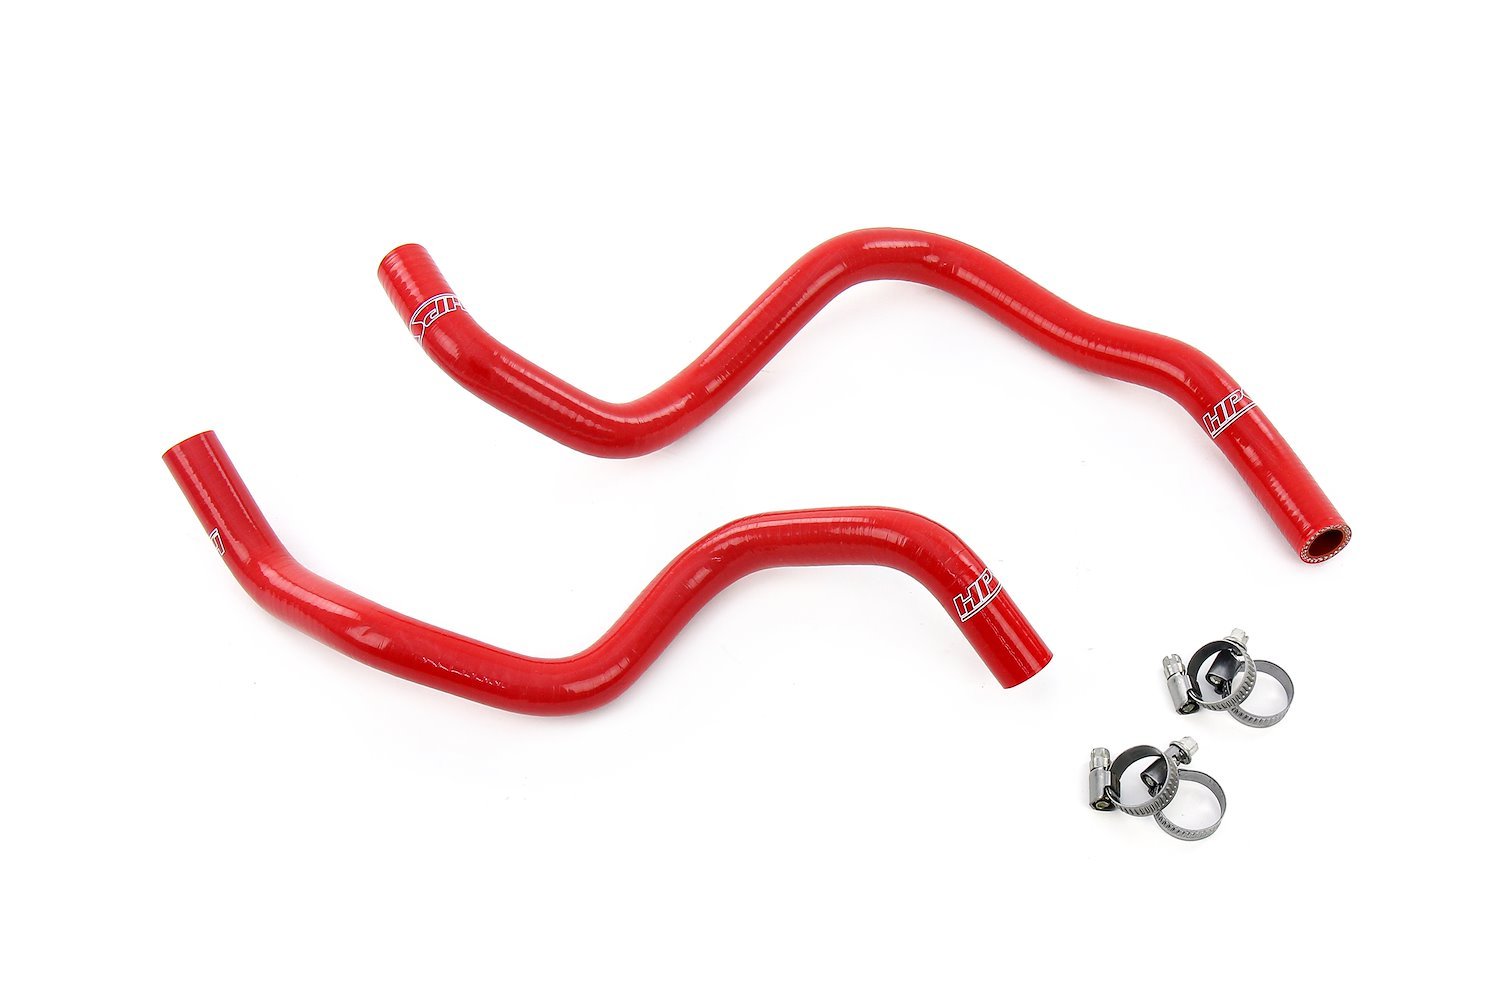 57-2108-RED Heater Hose Kit, 3-Ply Reinforced Silicone, Replaces Rubber Heater Coolant Hoses